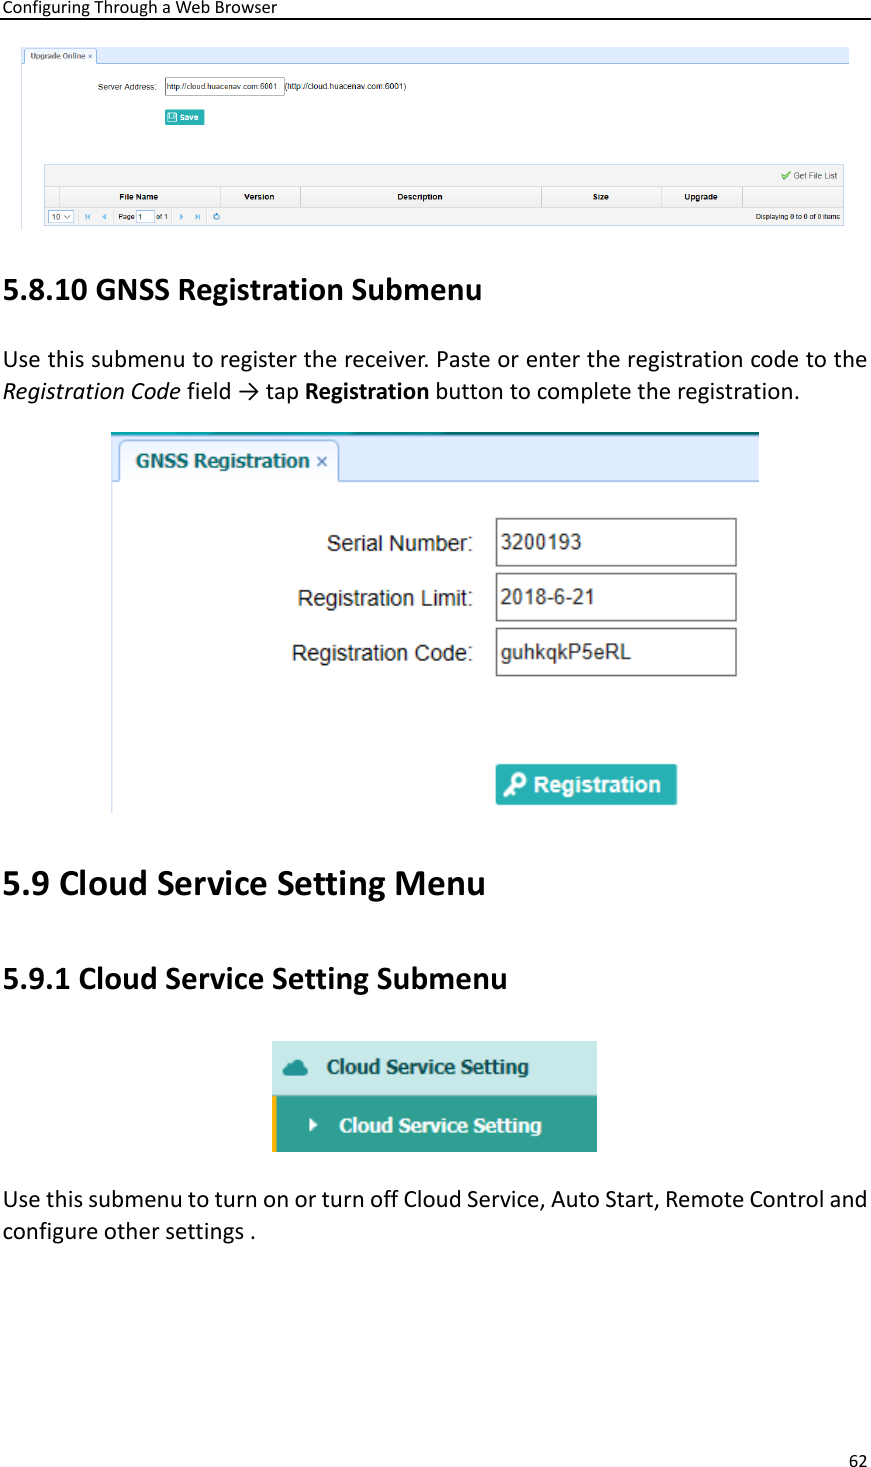 Configuring Through a Web Browser 62   5.8.10 GNSS Registration Submenu Use this submenu to register the receiver. Paste or enter the registration code to the Registration Code field → tap Registration button to complete the registration.    5.9 Cloud Service Setting Menu 5.9.1 Cloud Service Setting Submenu  Use this submenu to turn on or turn off Cloud Service, Auto Start, Remote Control and configure other settings . 